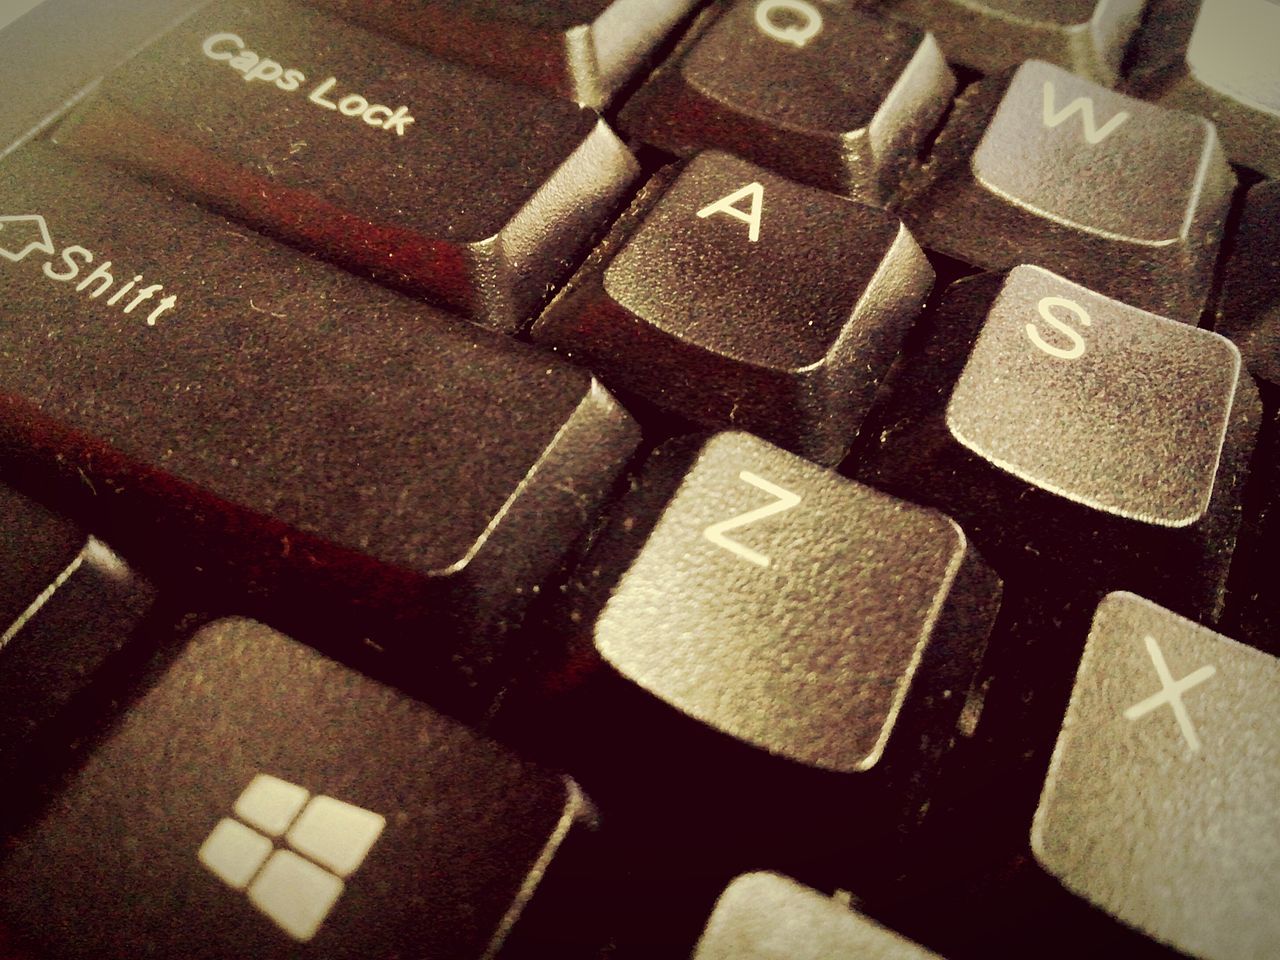 indoors, communication, text, close-up, computer keyboard, alphabet, western script, number, high angle view, technology, connection, full frame, wireless technology, still life, backgrounds, no people, capital letter, computer key, laptop, selective focus